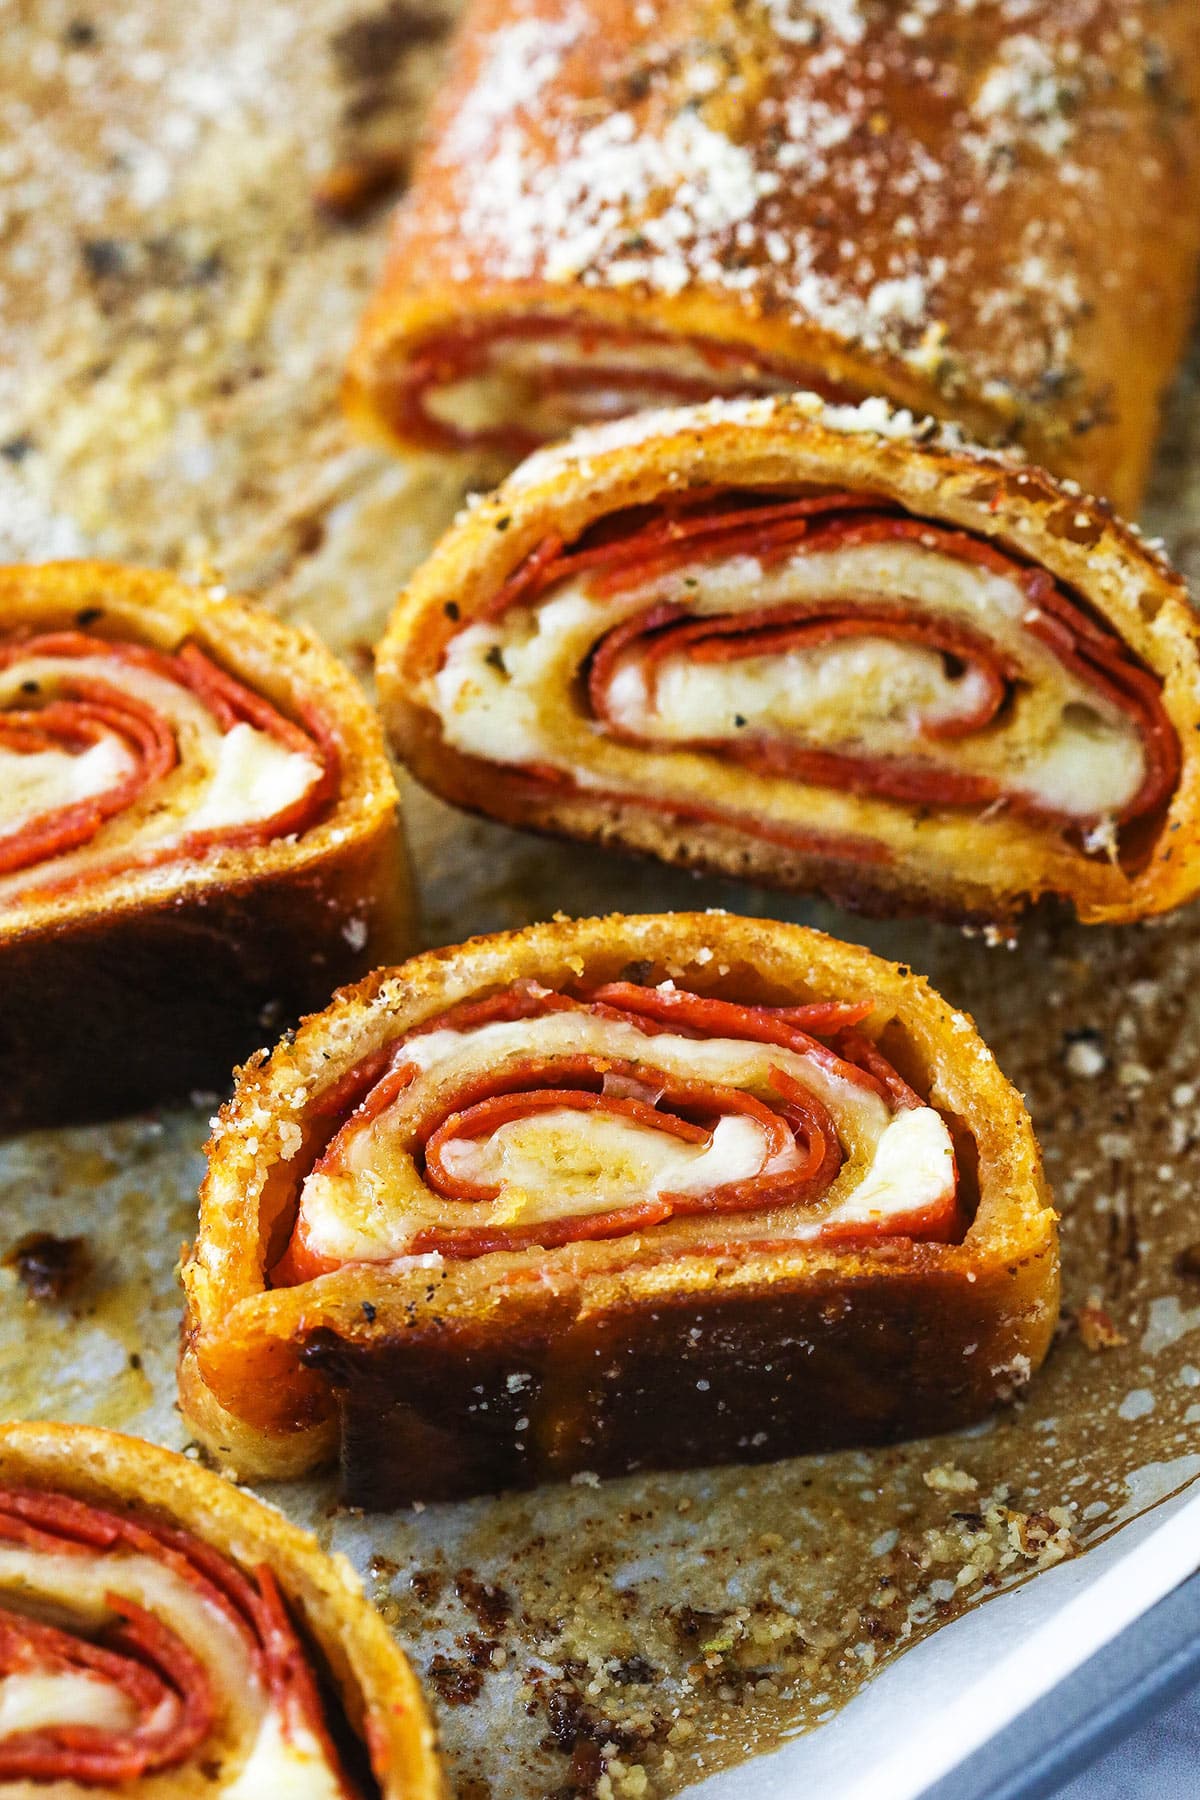 Closeup of a full pepperoni roll with slices of pepperoni roll.